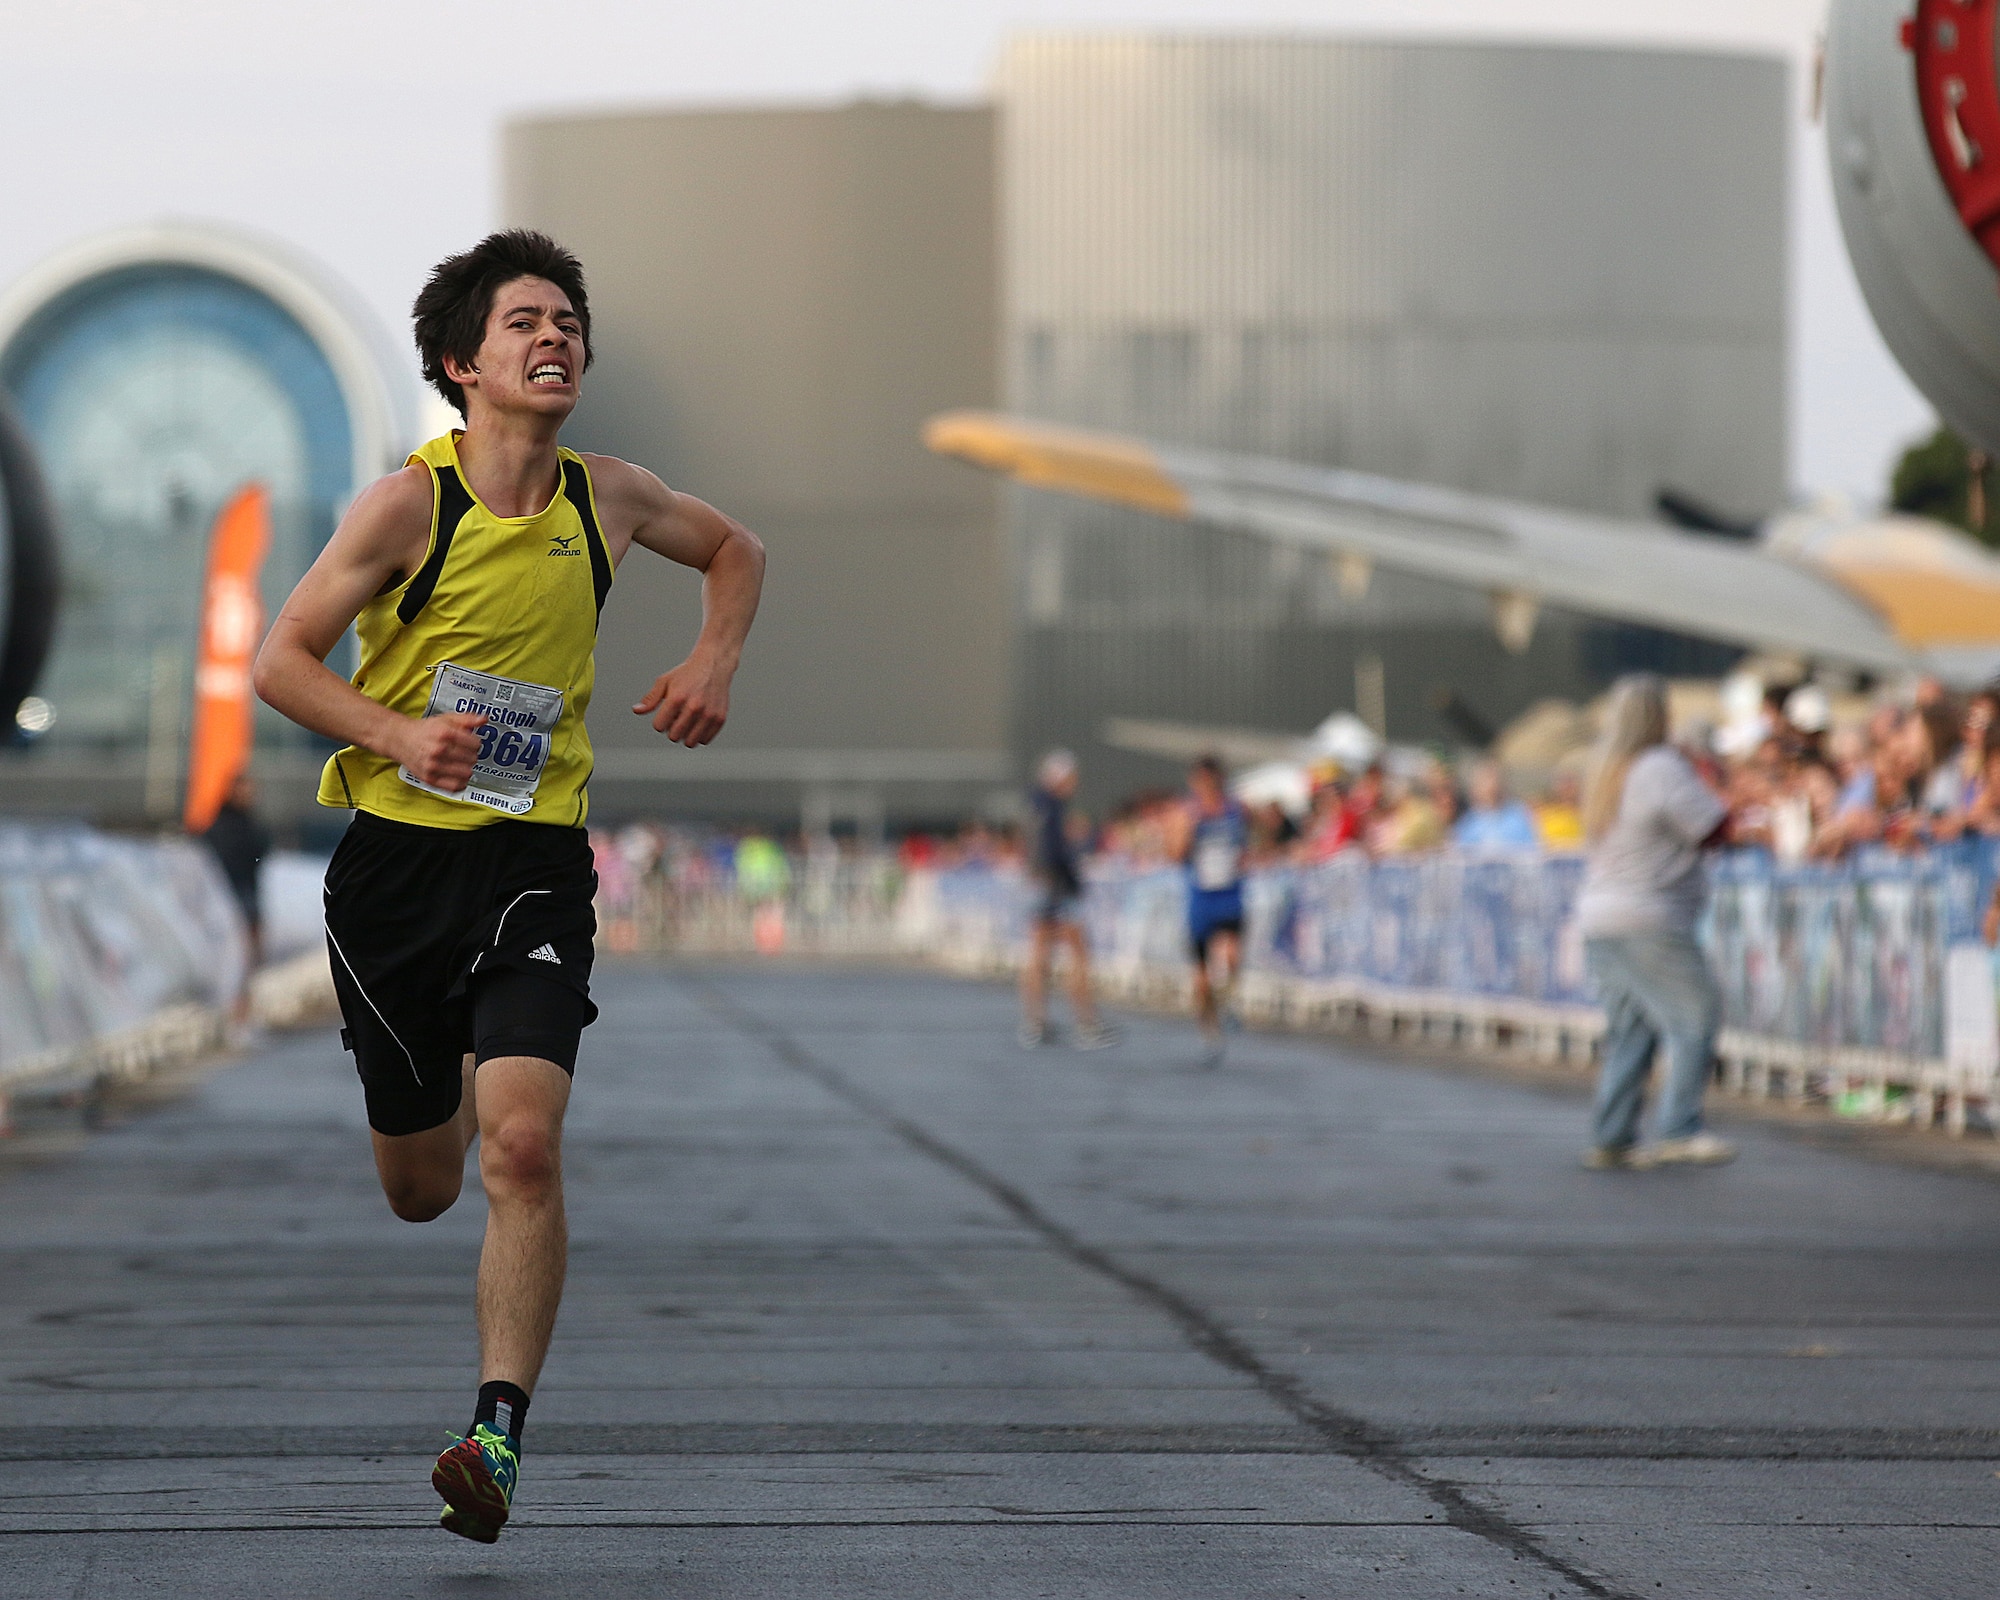 WRIGHT-PATTERSON AIR FORCE BASE, Ohio – Christoph Cikraji, from Durango, Co., races across the finish line in the 19th Annual Air Force Marathon held Sept. 19, 2015. Cikraji won third place in the AF Marathon 10K for the male division with a runtime of 37:35. The Air Force Marathon is an annual endurance event held the third Saturday of September at Wright-Patterson Air Force Base in Dayton, Ohio. (U.S. Air Force photo /Tech. Sgt. Patrick O’Reilly)